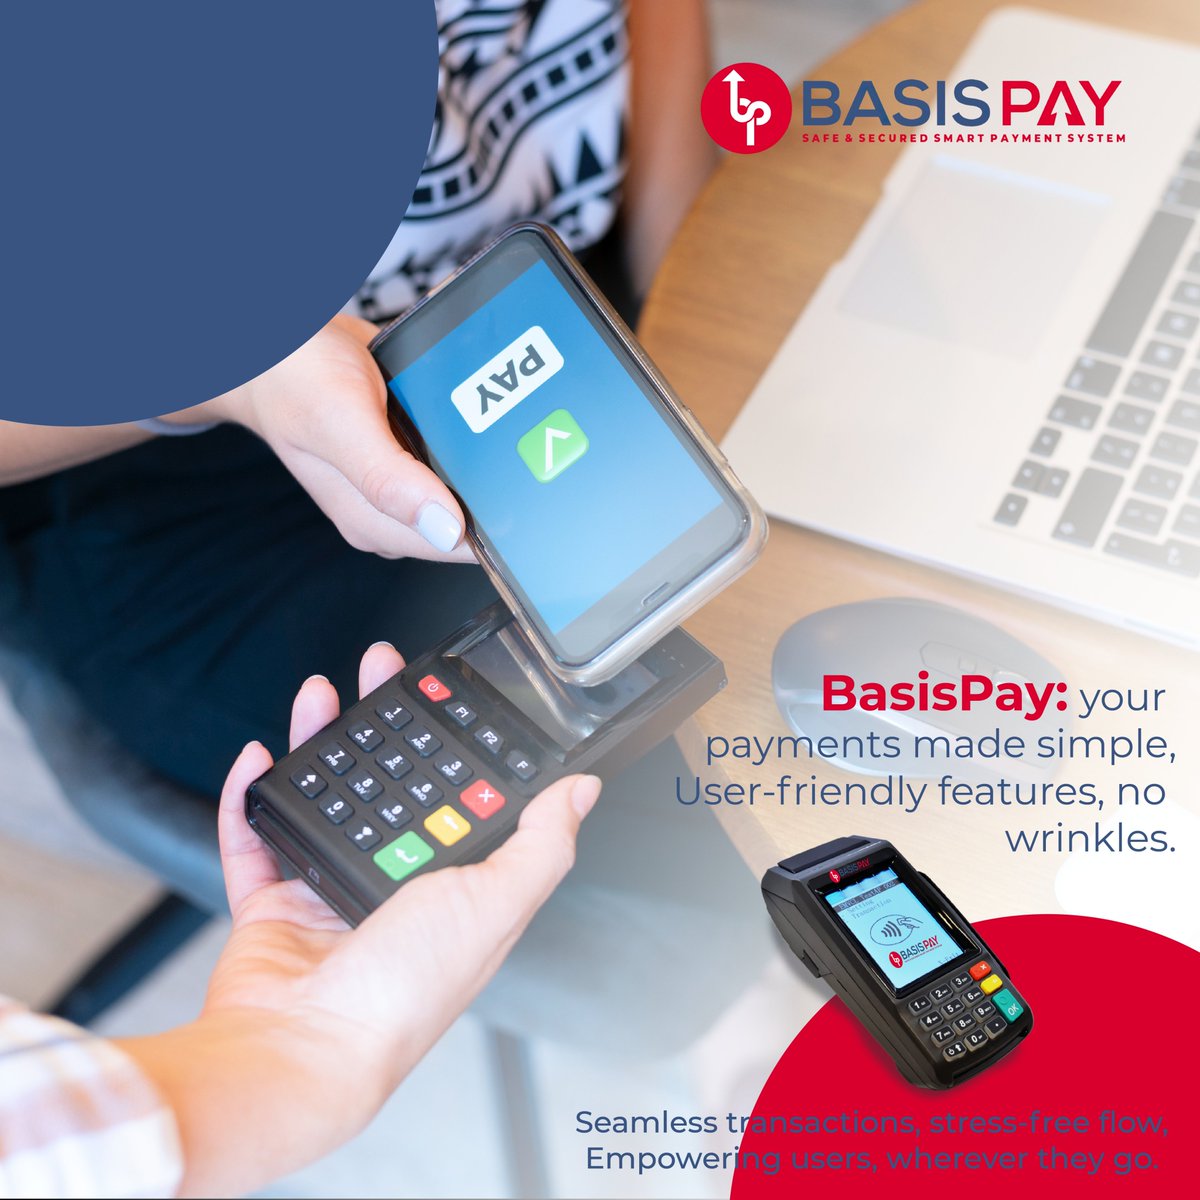 BasisPay payment system 

#basispay #upi #pointofsale #contactlesspayments #buy #bank #finance #news #online #mobile #shopping #pos #qrpay #qr #digitalpayment #payments #paymentgateway #india #digitalmoney #debitcard #creditcard #buy #digital #world #ai